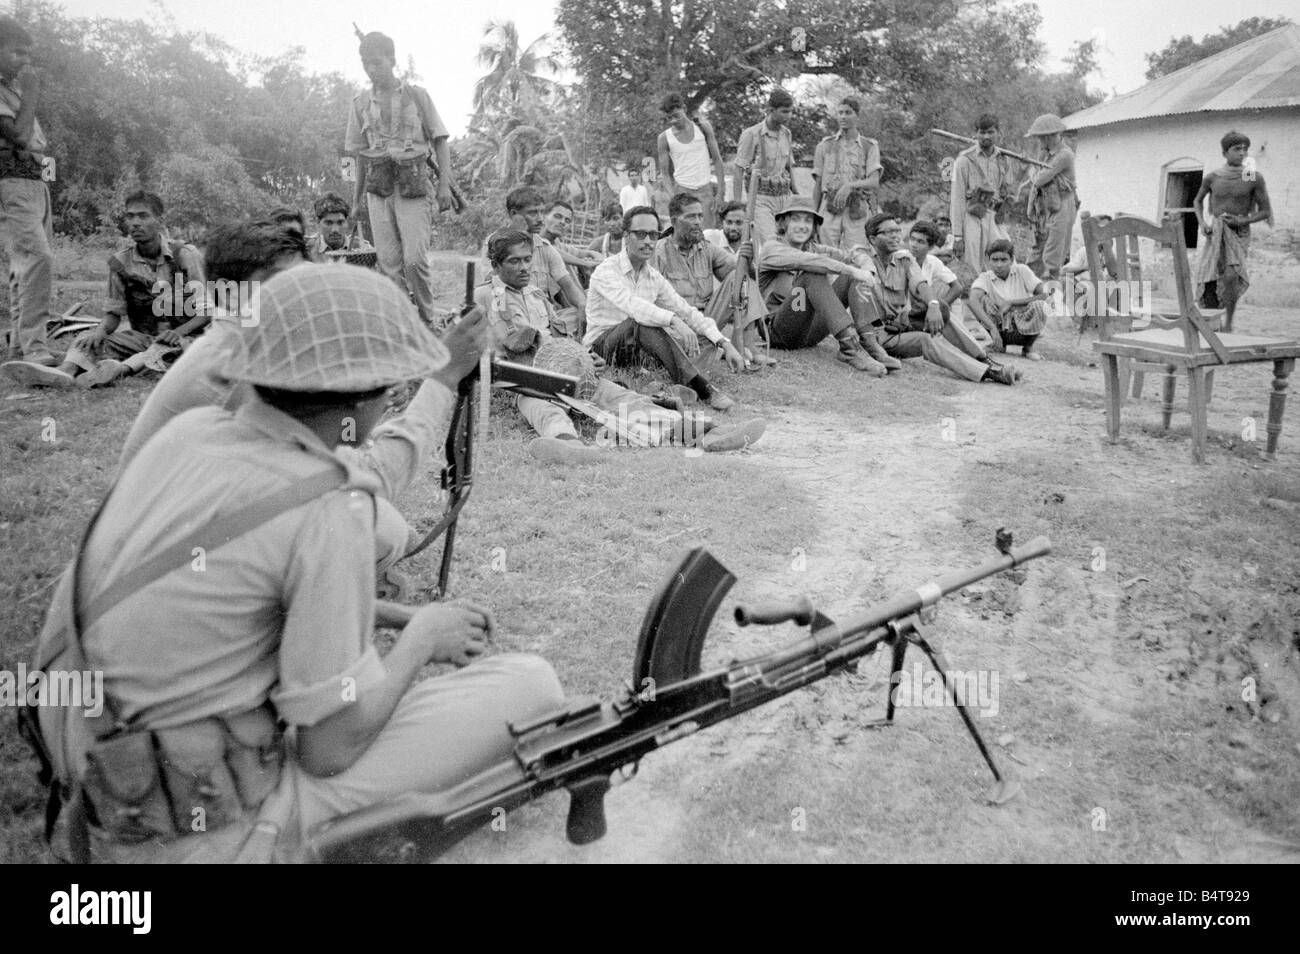 Pakistan - Bangladesh Civil War June 1971;A large area of East Pakistan territory is under the control of the Bangladesh Freedom Fighters. These pictures were taken on patrol with an operational unit whose camp is in the Jungle just inside the Indian border.;Our Picture Shows: John Pilger with troops on Patrol in East Pakistan Stock Photo